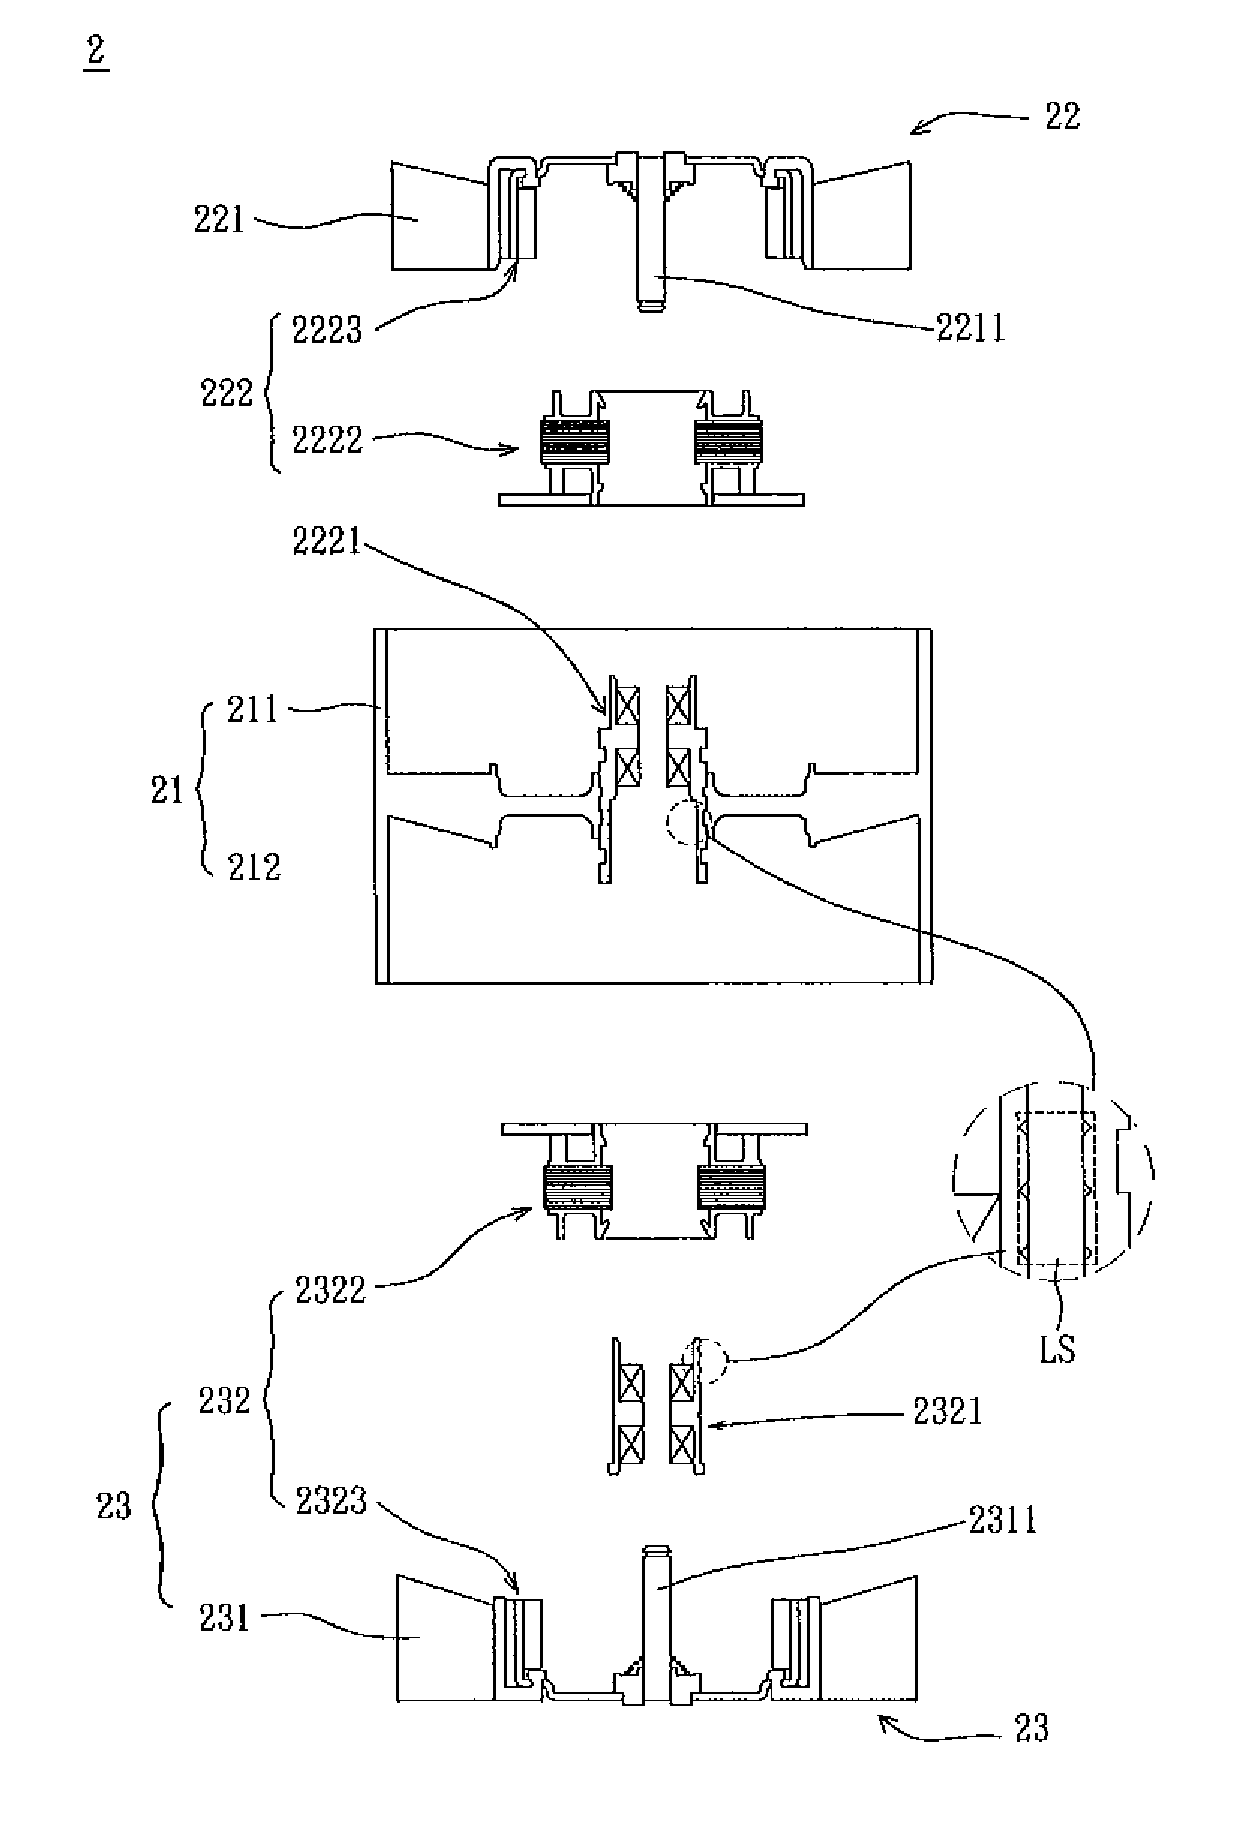 Fan with impellers coupled in series and fan frame thereof